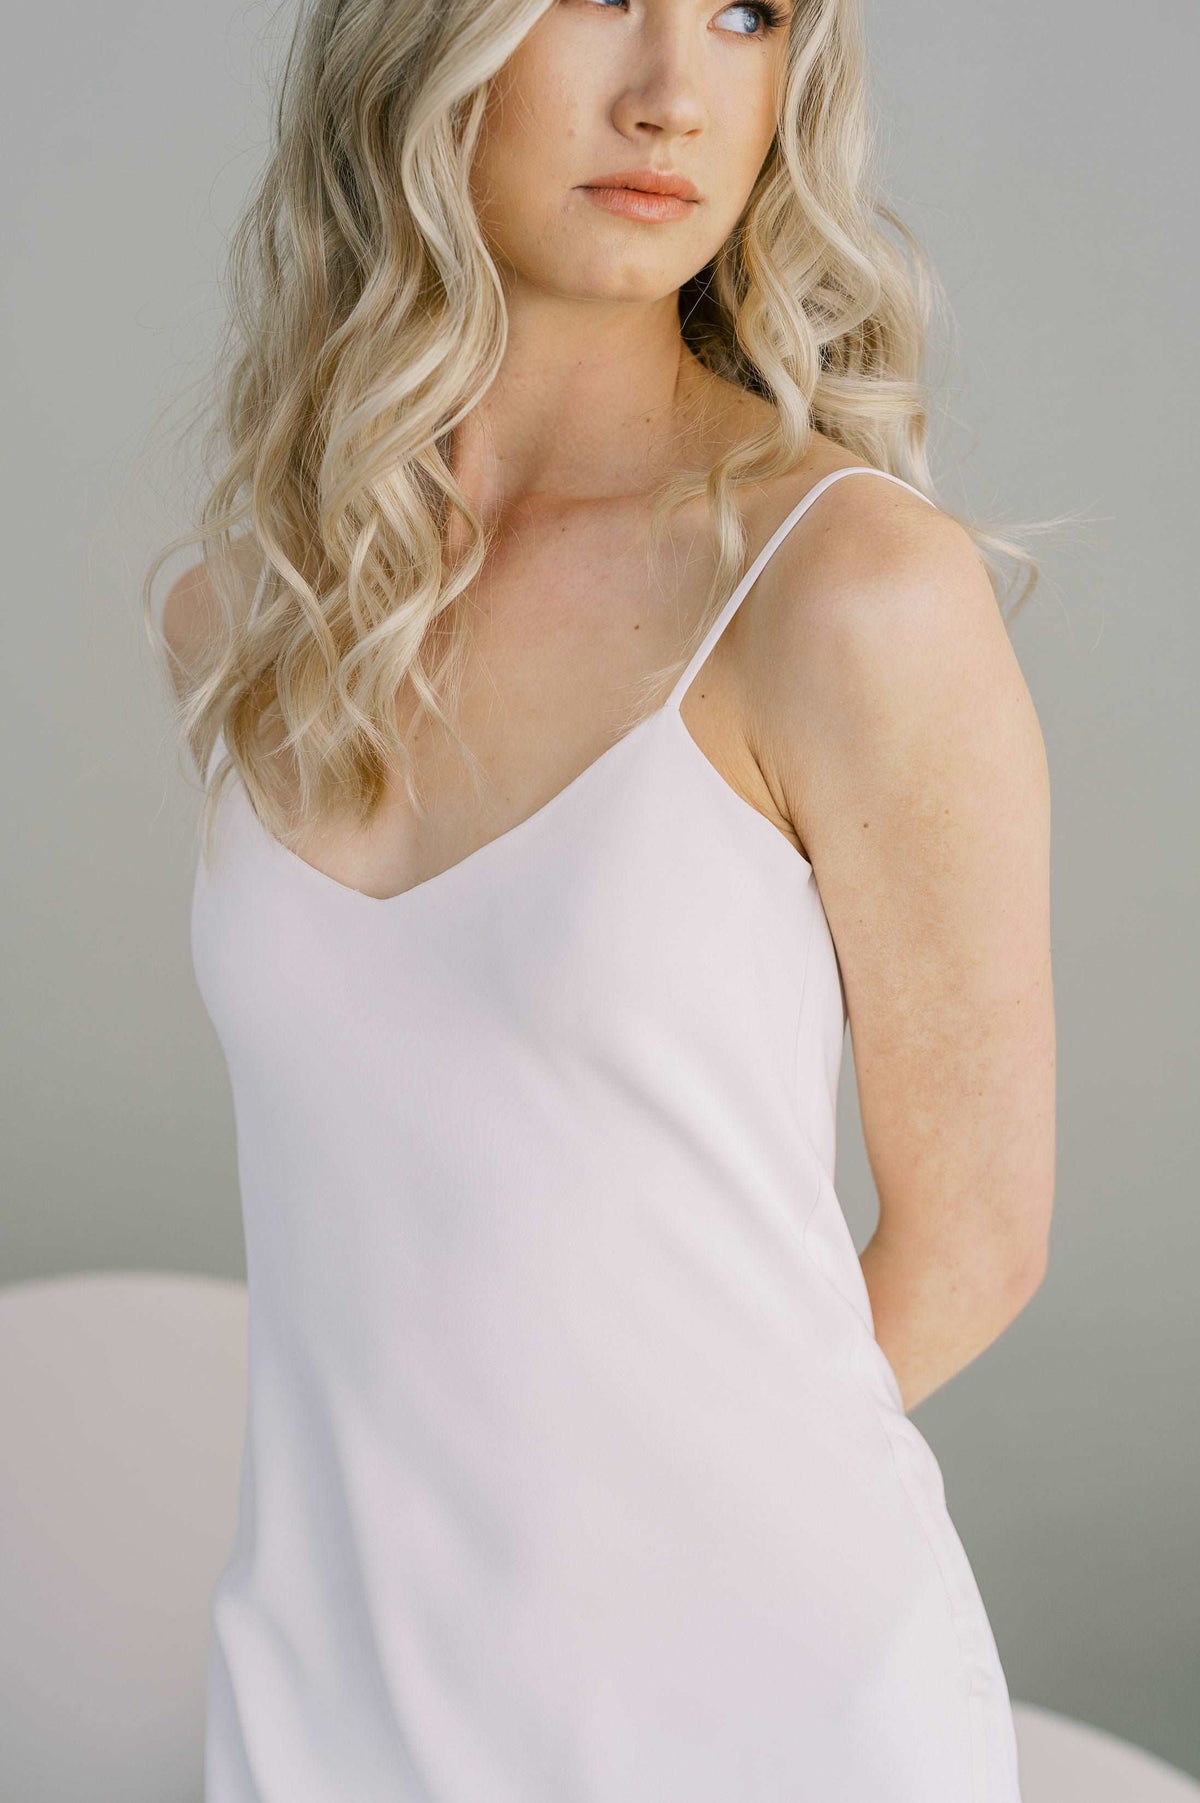 Simple slip wedding dress with a low v back. Available in silk or eco crepe. Made to order by Catherine Langlois, Toronto, Canada.